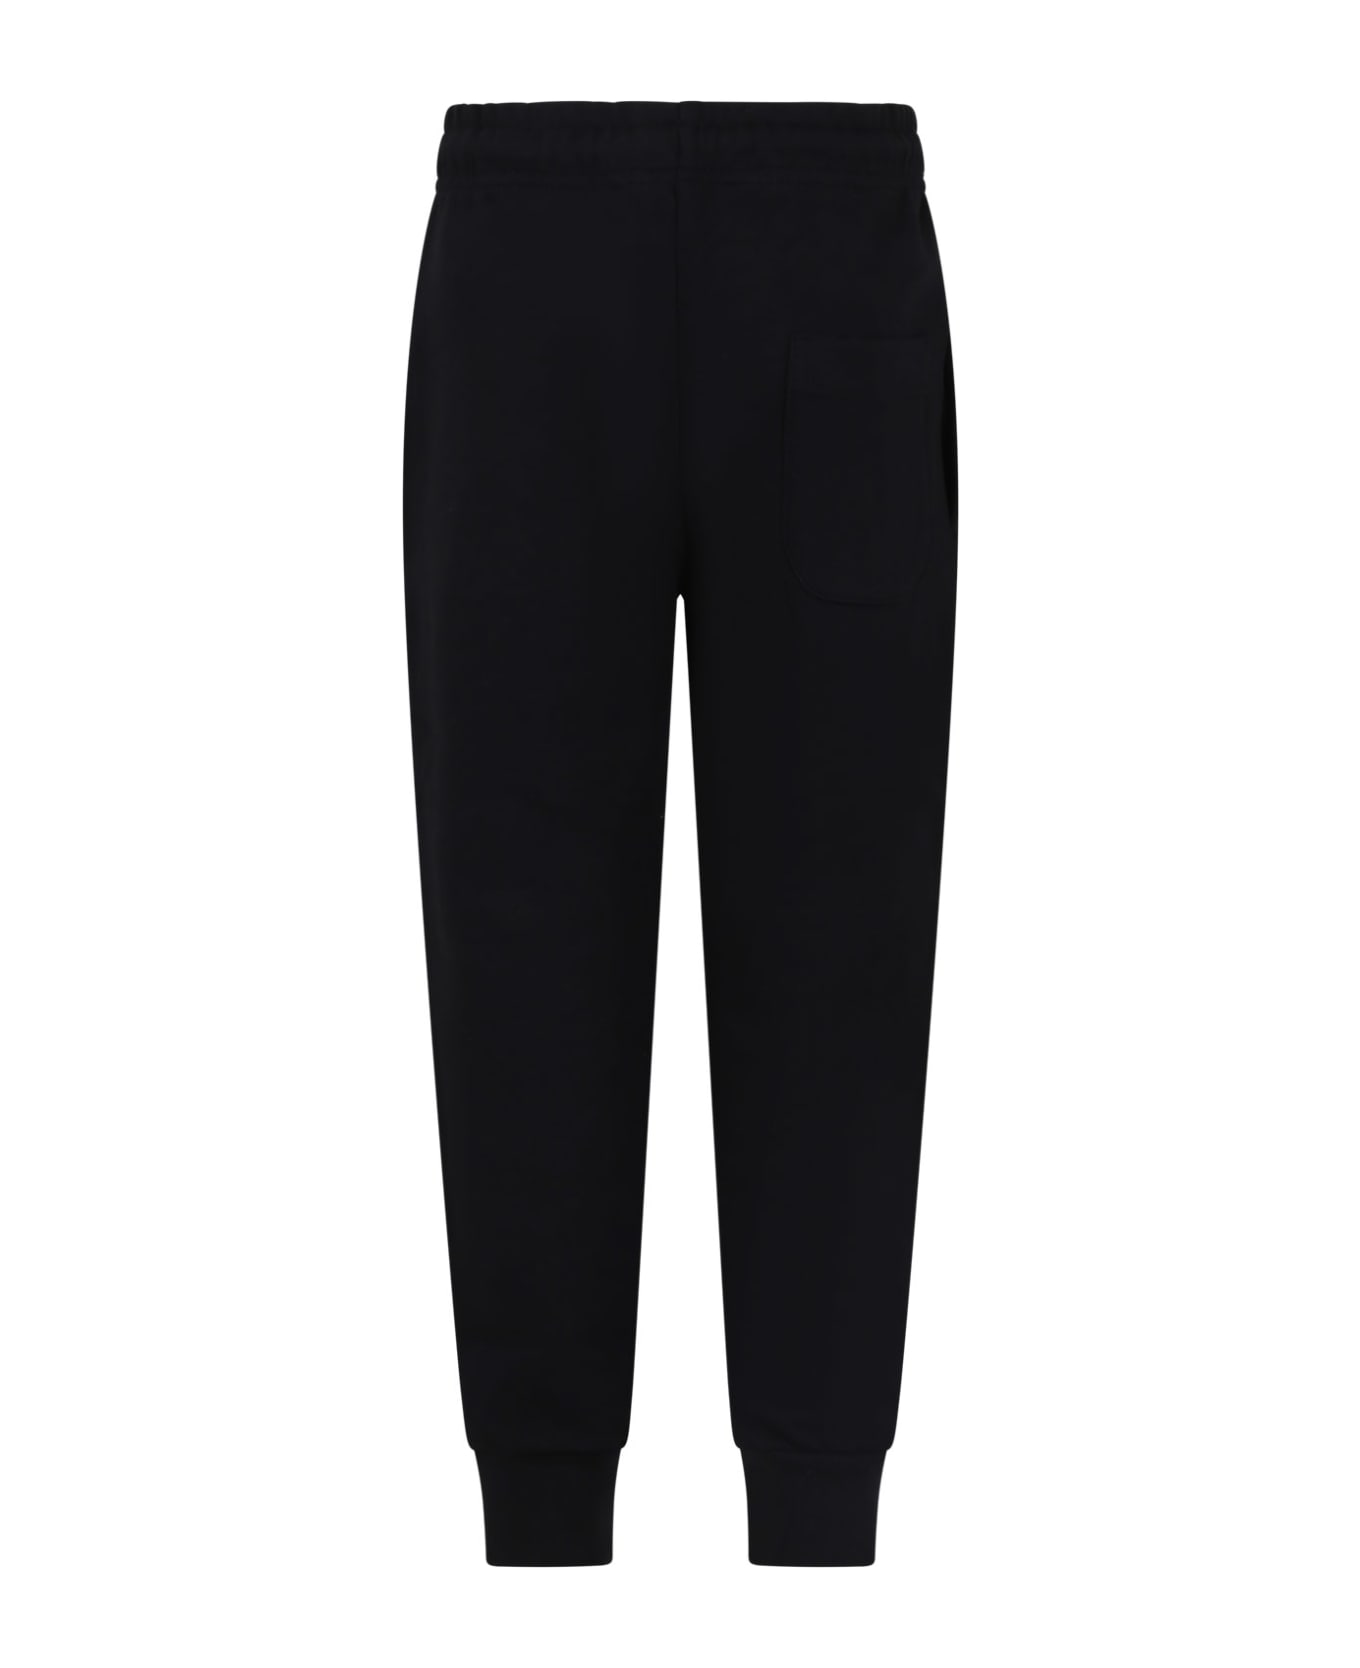 MSGM Black Trousers For Kids With Logo - Nero ボトムス